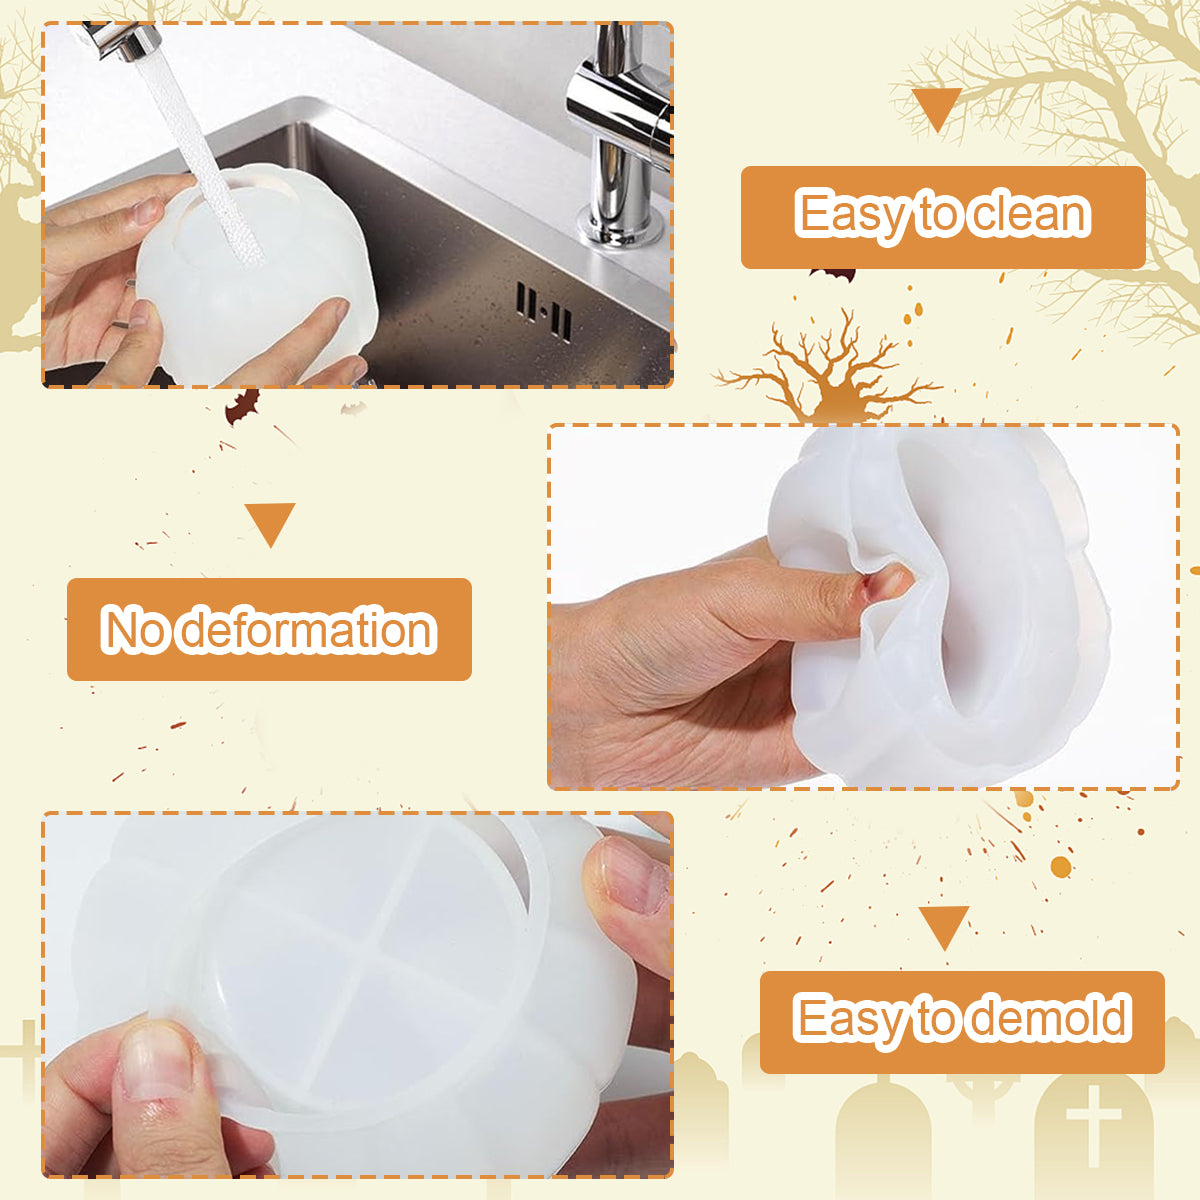 HASTHIP® Resin Jar Mold, Halloween Pumpkin Resin Jar Mold with Lid, Epoxy Molds Silicone for DIY Jewelry Storage Box, Candle Holder, Candy Container Art Craft Resin Supplies